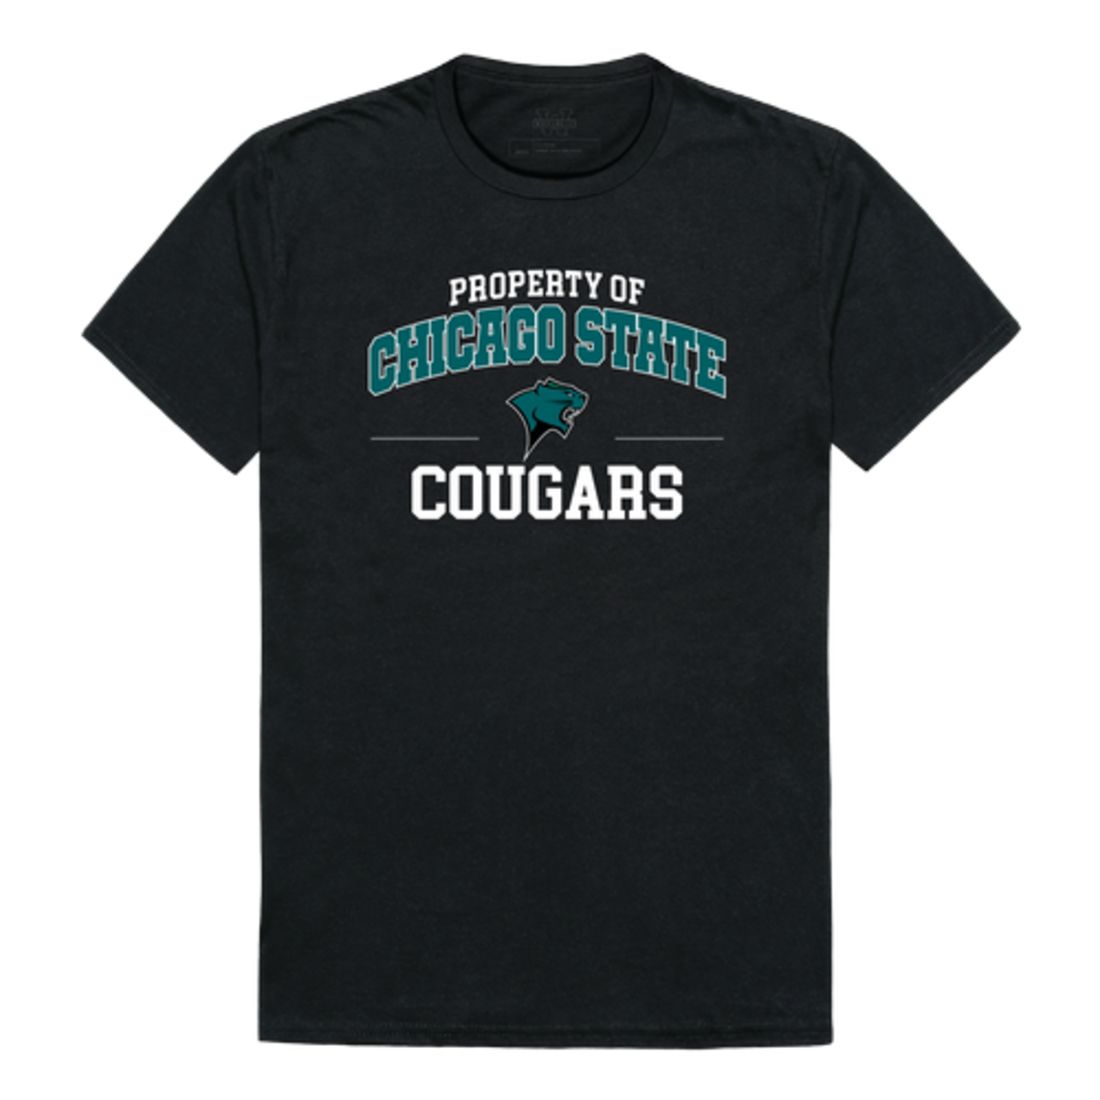 Chicago State University Cougars Property T-Shirt Tee